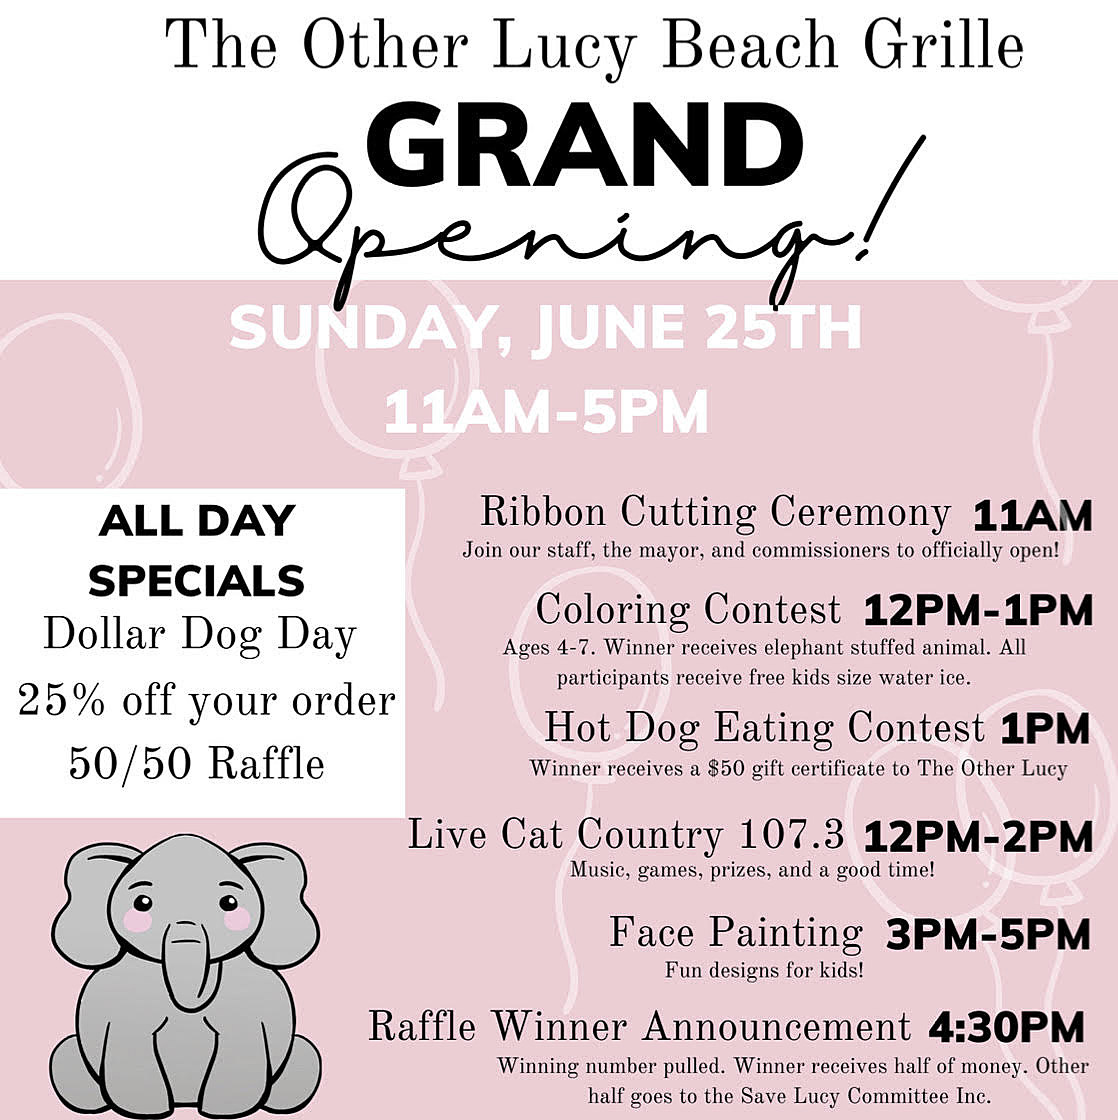 The Other Lucy Beach Grille Grand Opening